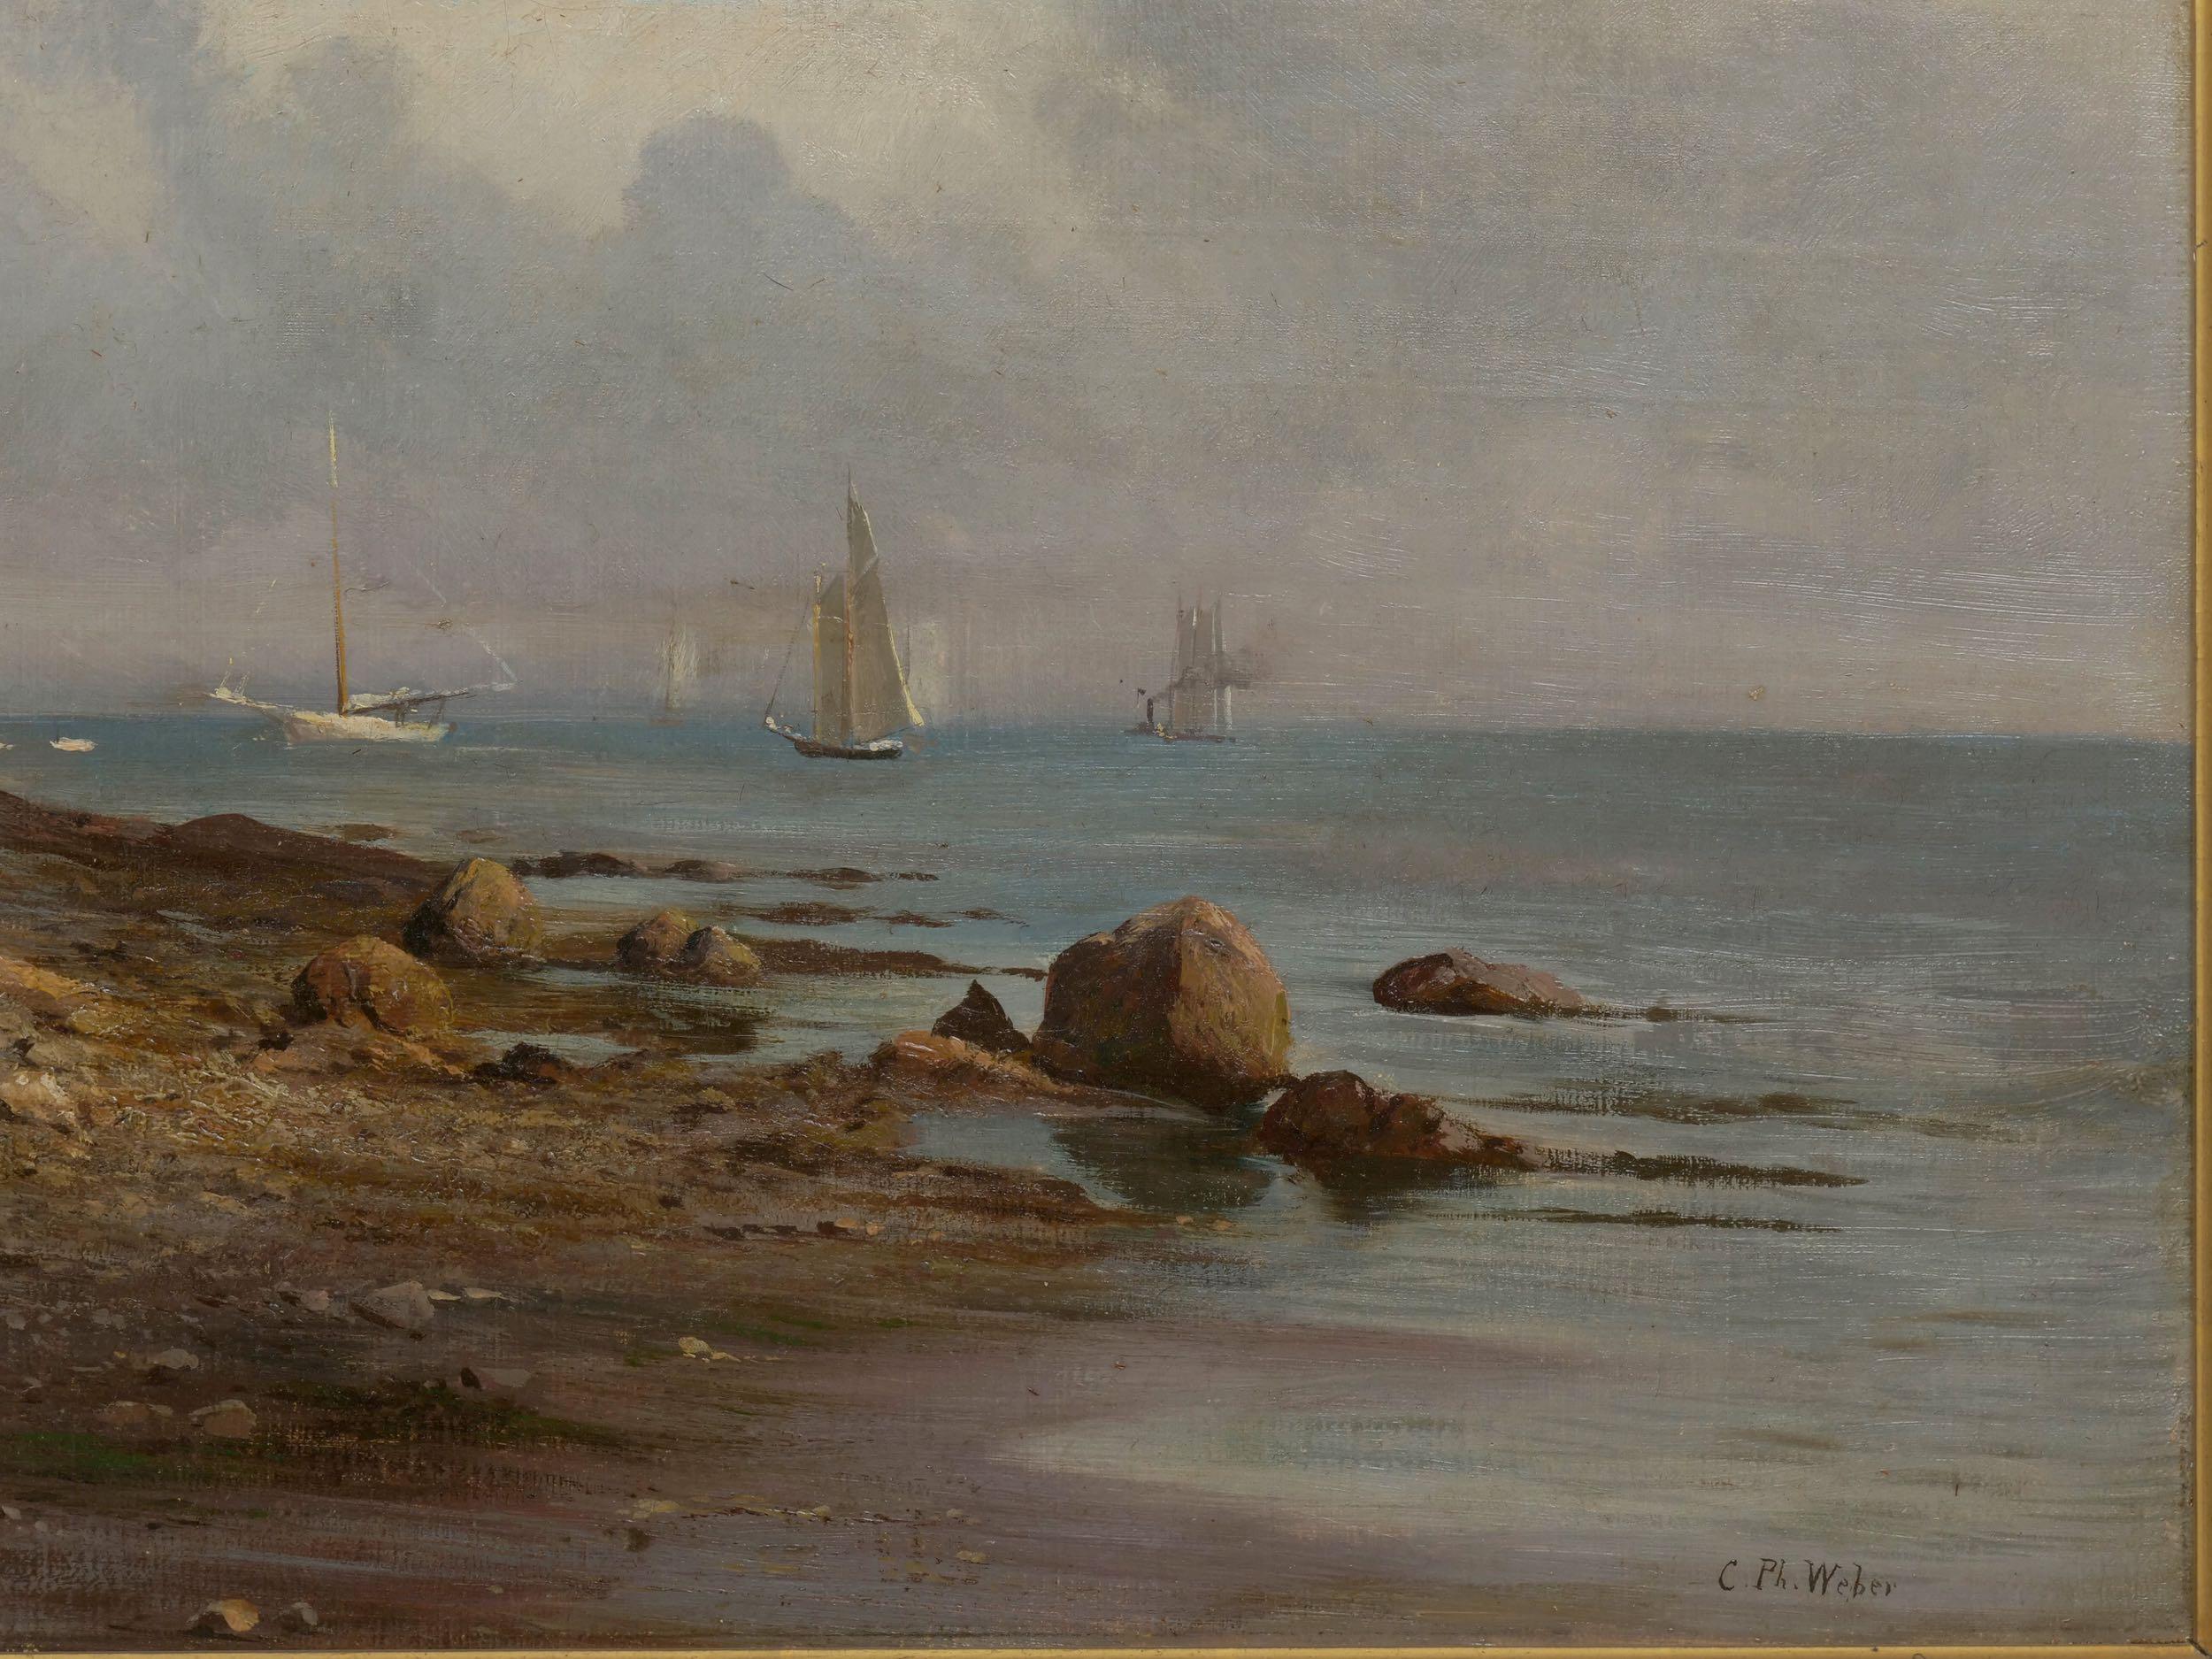 19th Century American Landscape Painting “Boats off a Rocky Coast” by Carl Philipp Weber